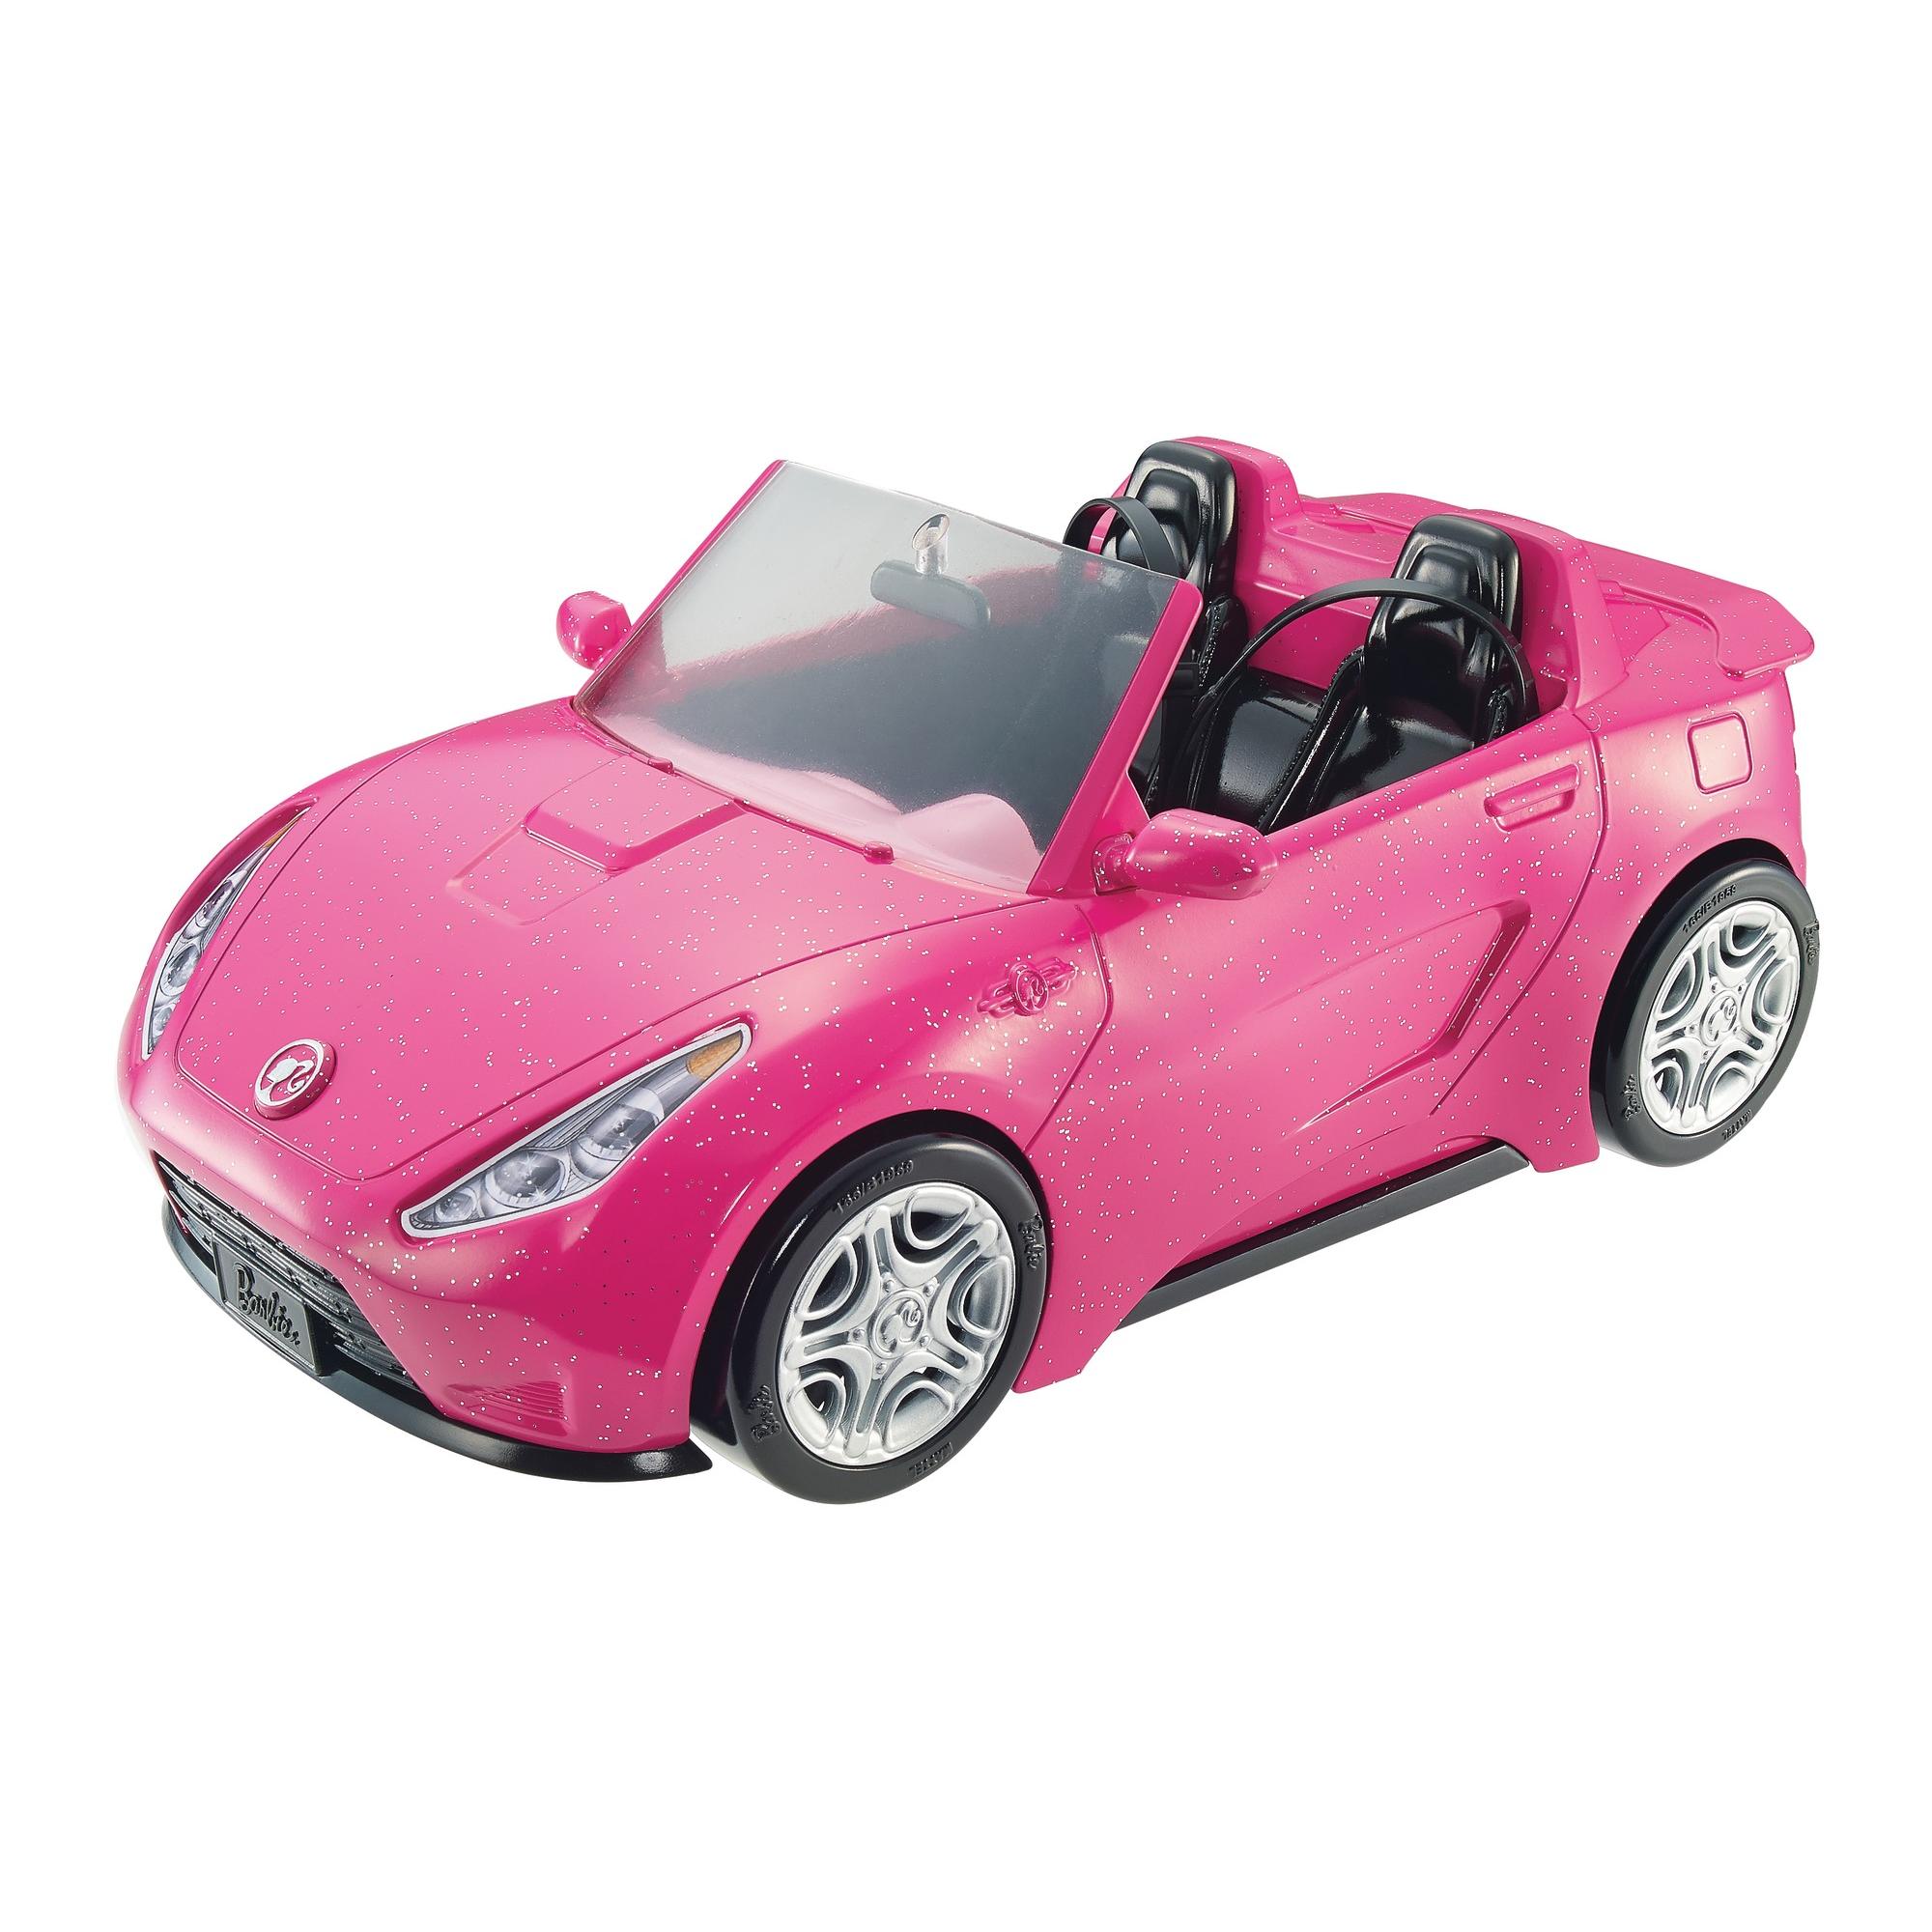 Barbie Convertible Toy Car, Sparkly Pink 2-Seater with Rolling Wheels - image 1 of 7